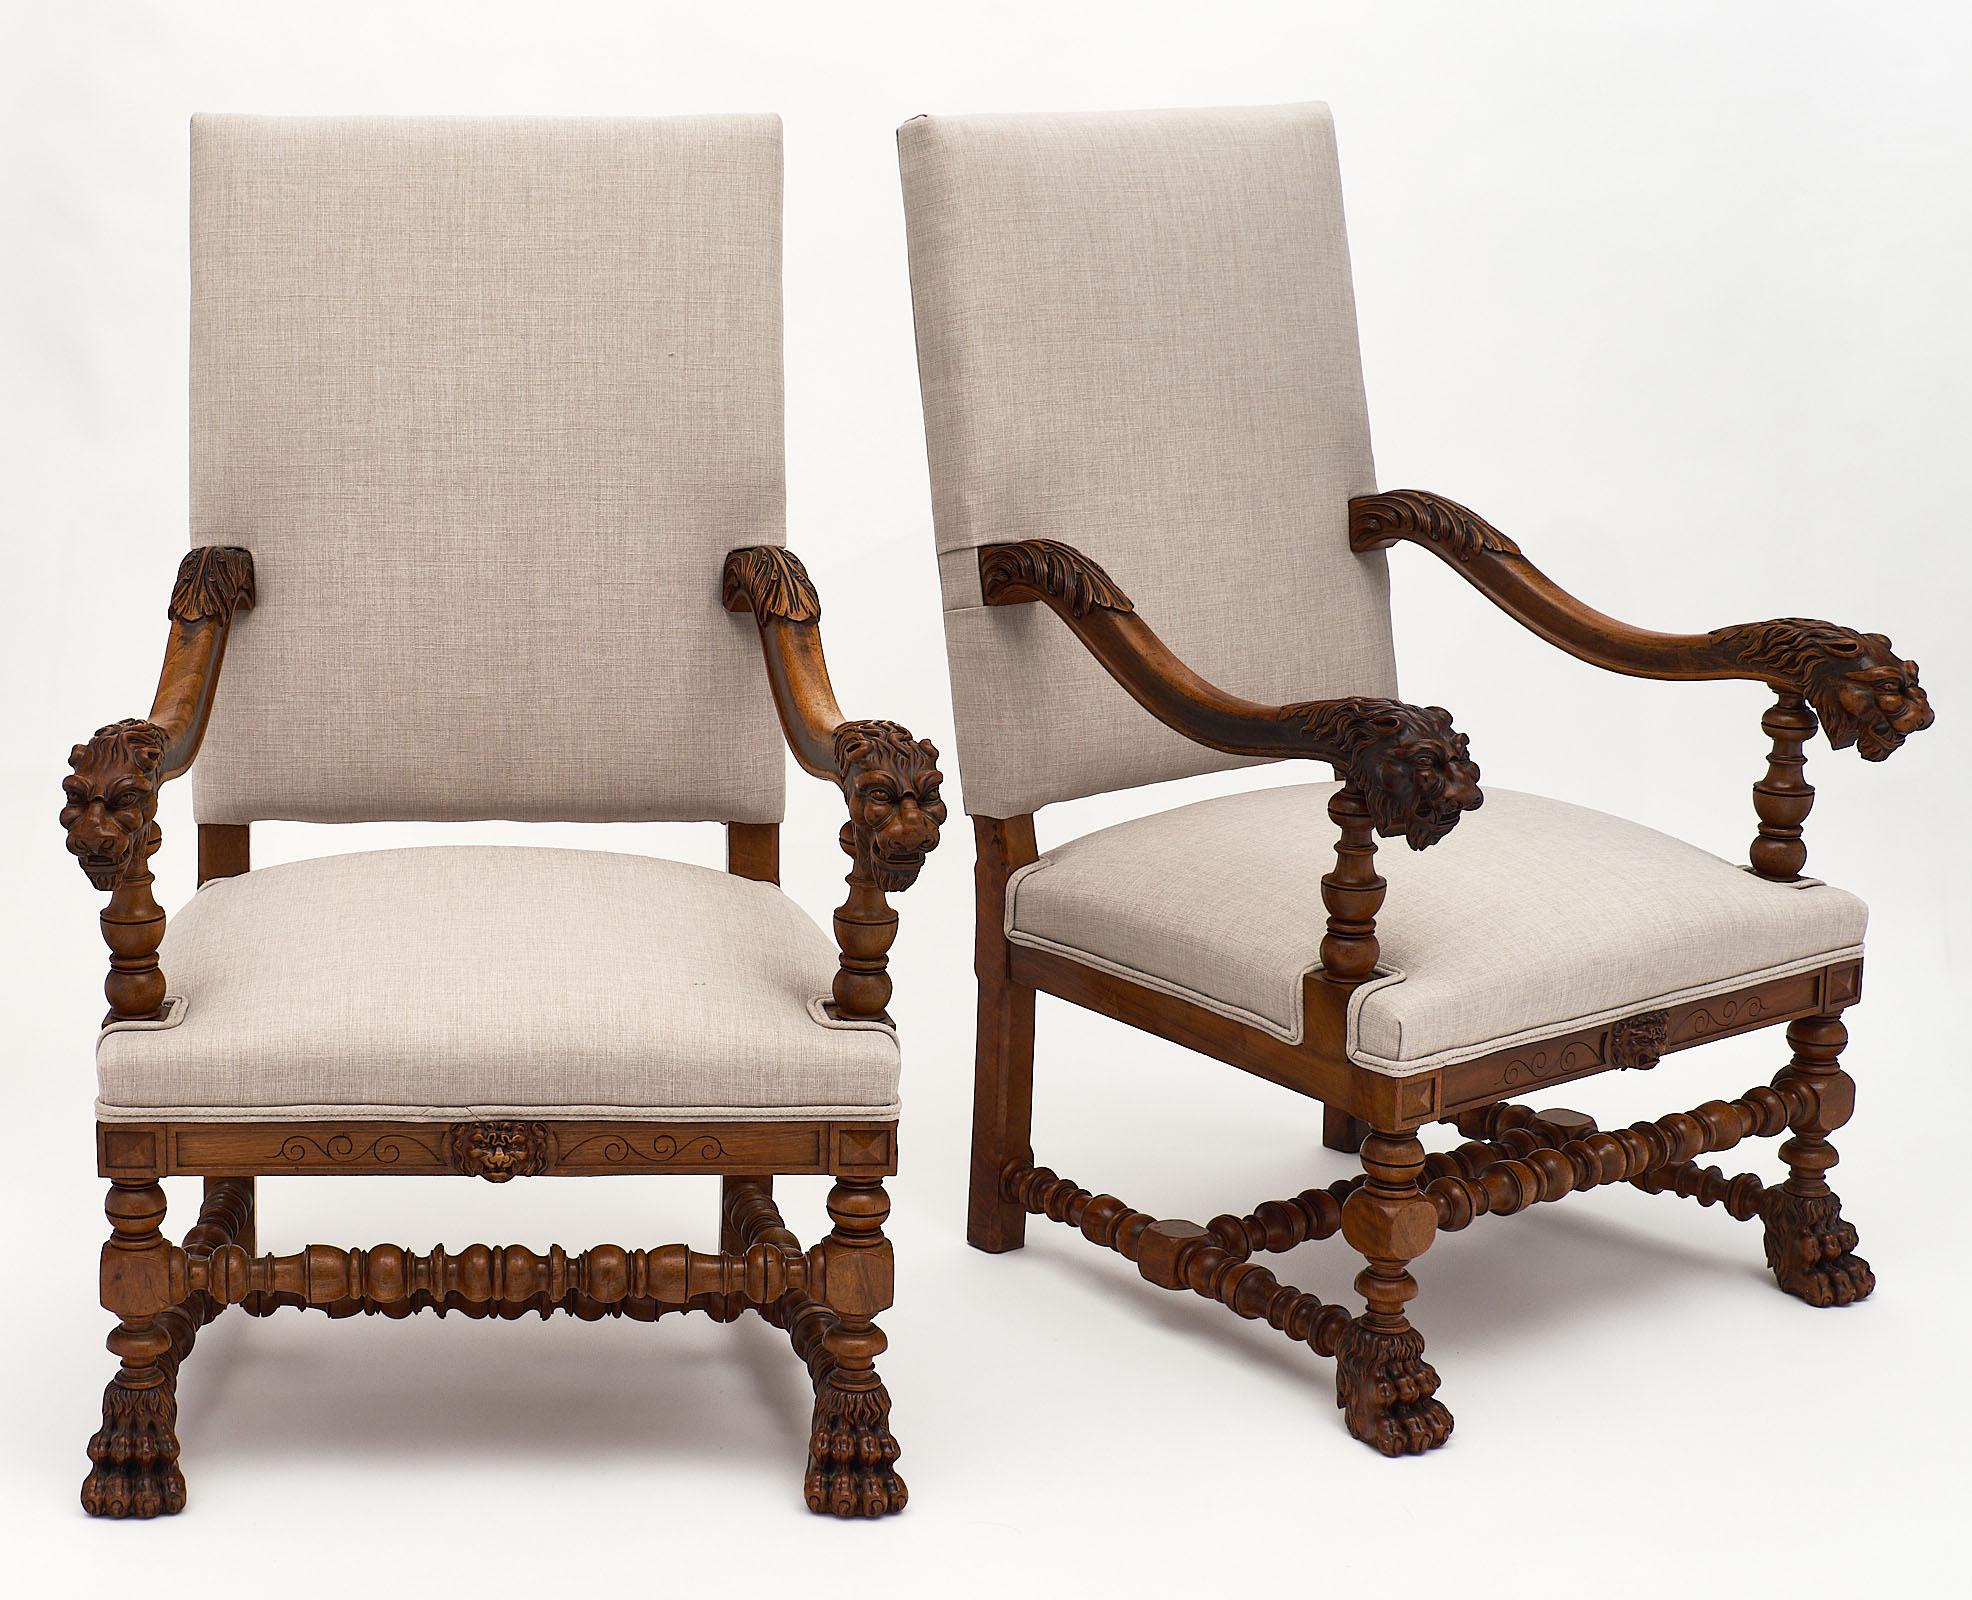 Louis XIII style French armchairs made of finely hand carved walnut. We love the intricate details of the lion heads on the armrests, and paws on the feet. These chairs are very comfortable with fantastic proportions. They have been newly